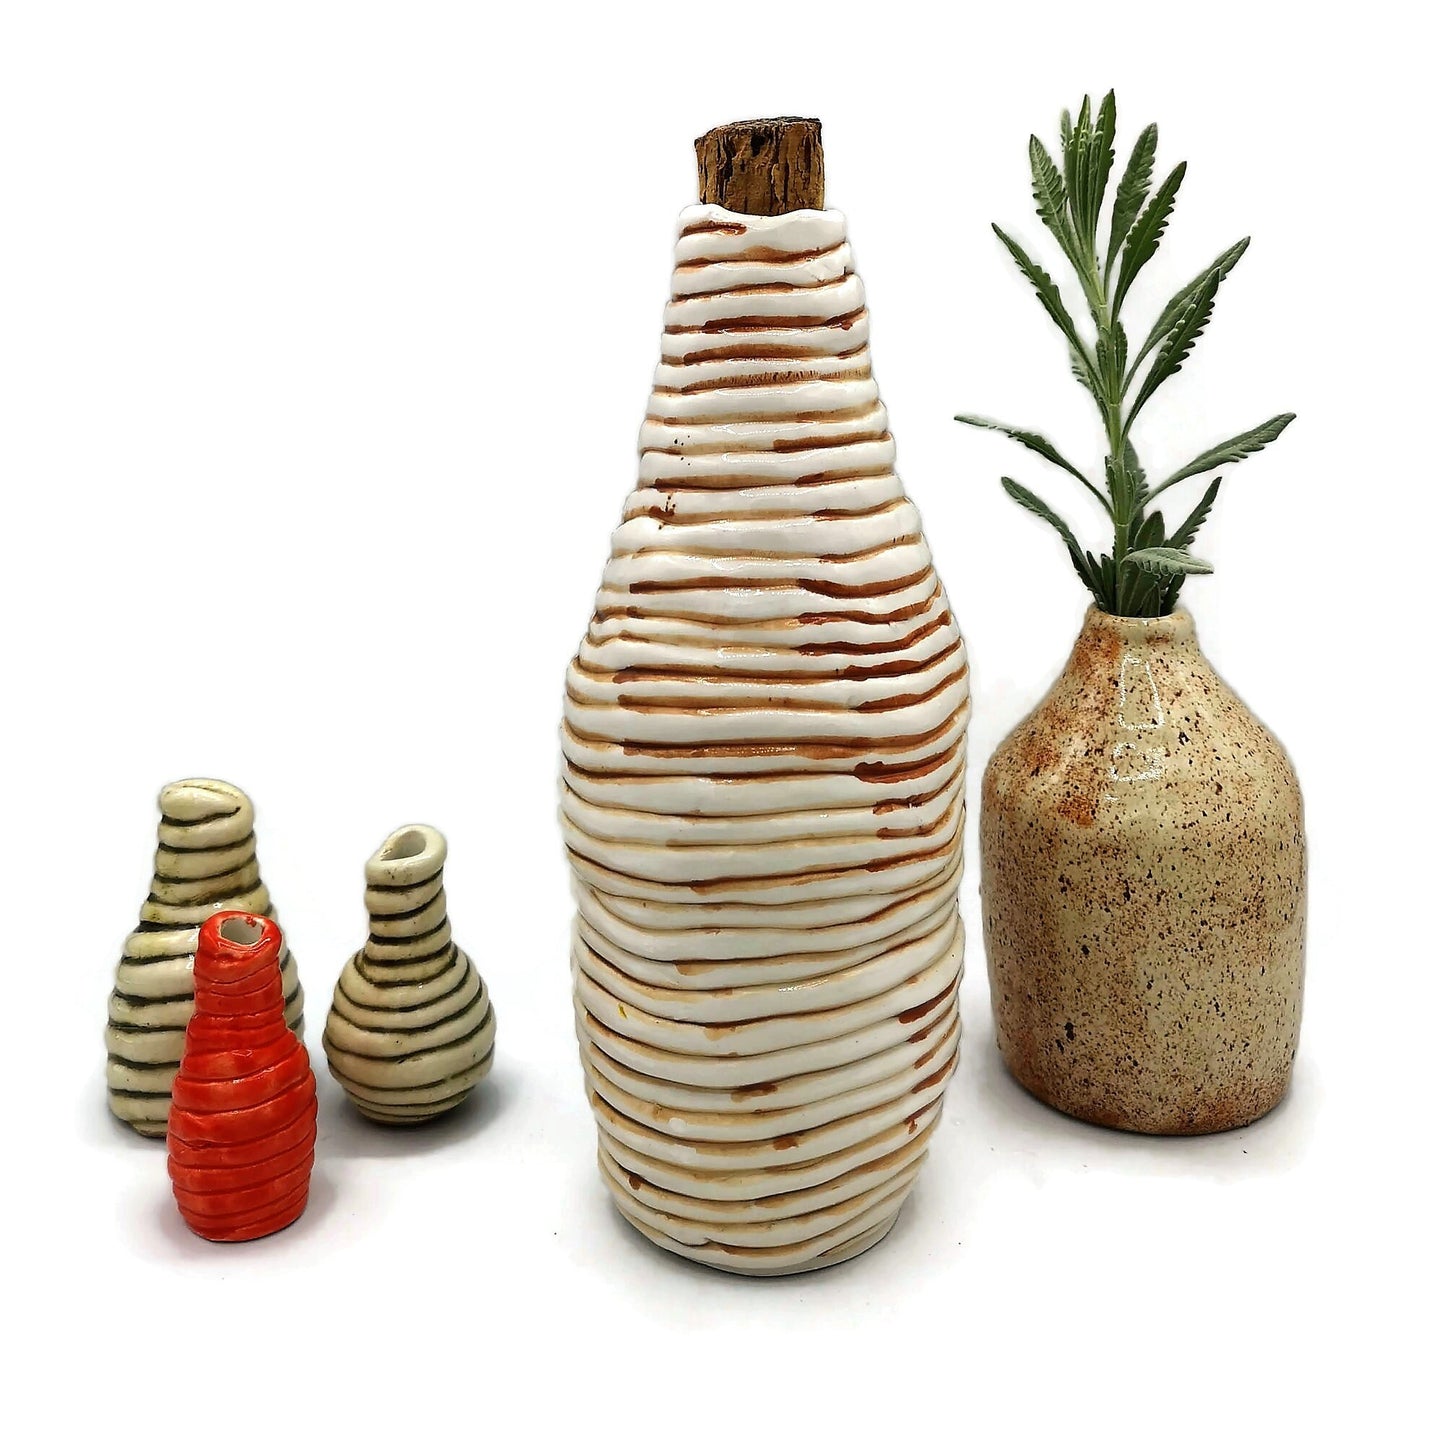 CERAMIC BOTTLES, DECORATIVE Bottles With Cork Stopper, Handmade Host Gift For Mom with Antique Look - Ceramica Ana Rafael